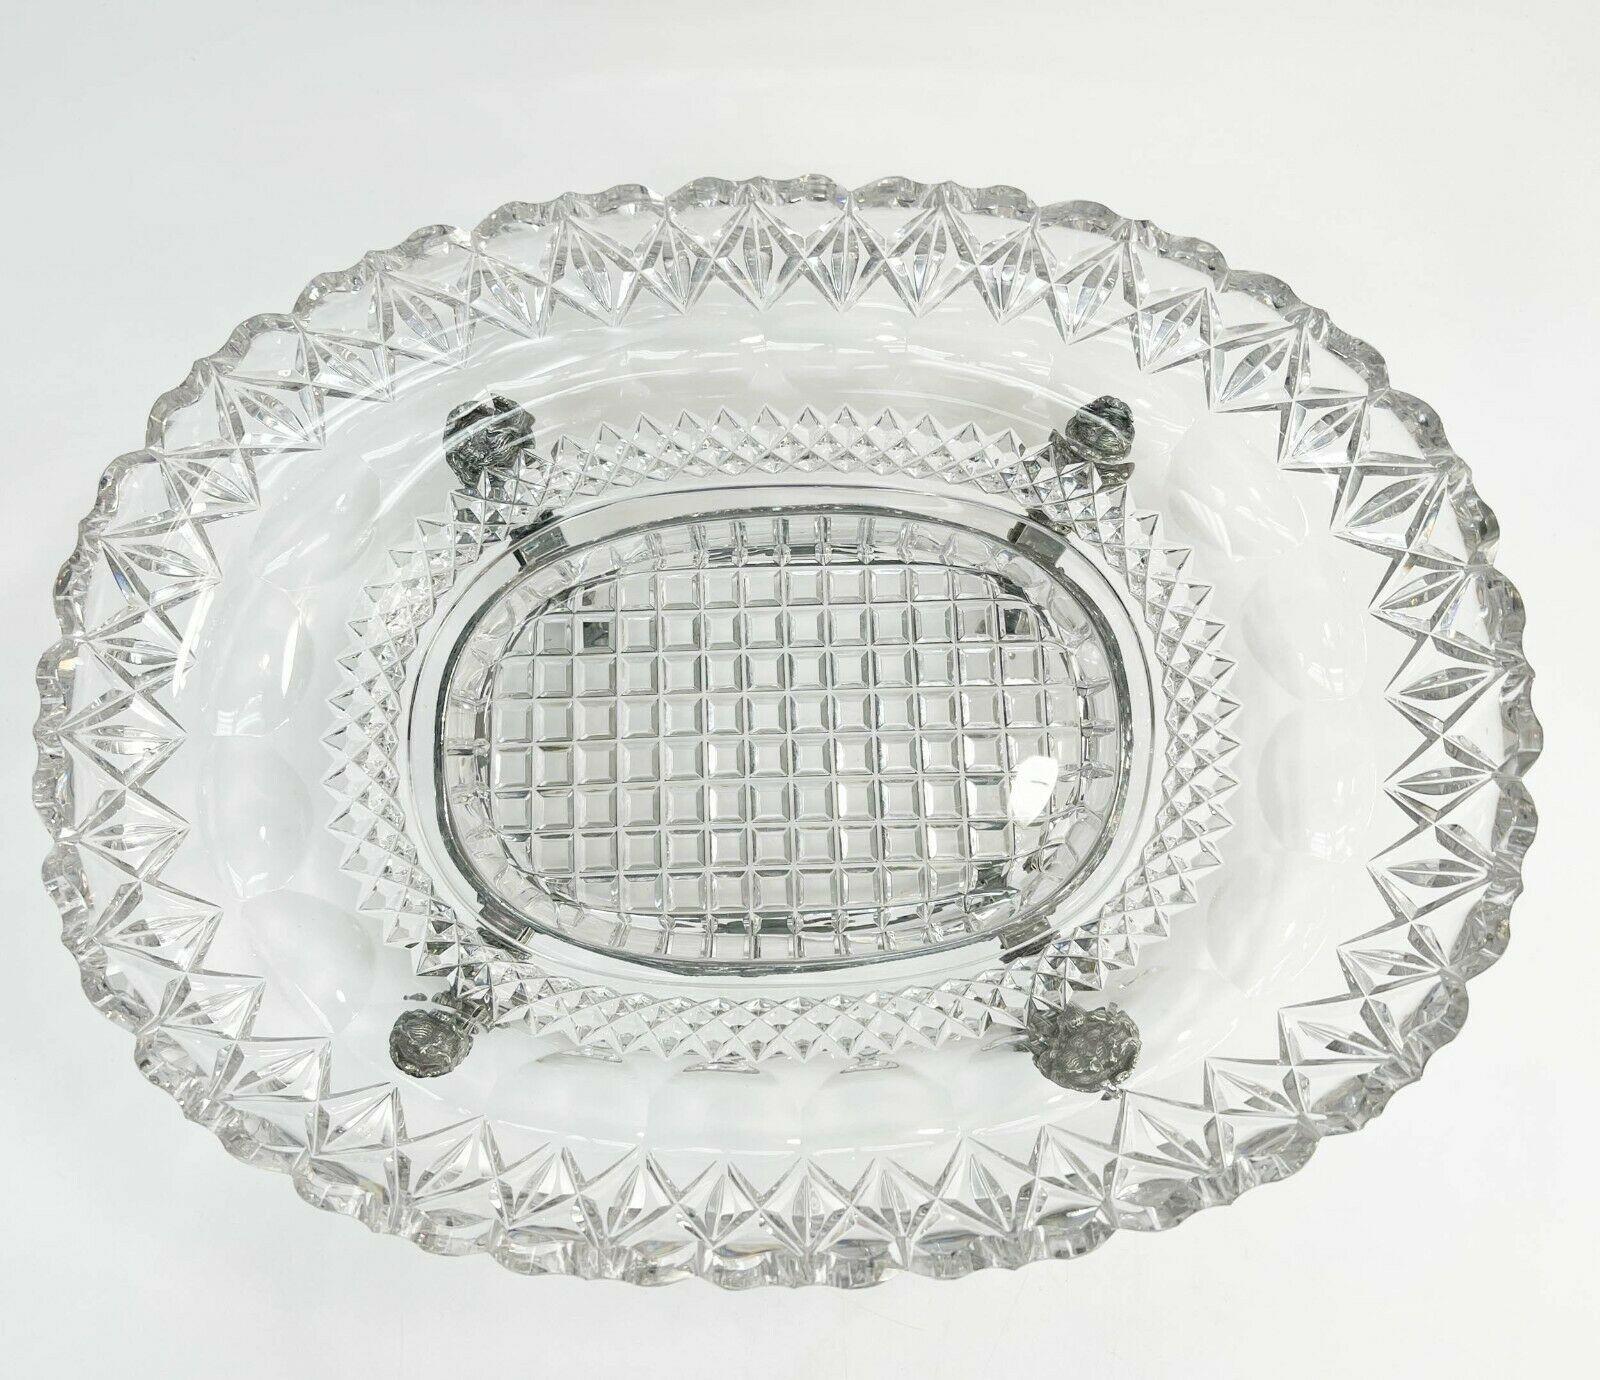 Pairpoint silverplate and cut glass centerpiece bowl, circa 1920

Silverplate mounted glass bowl with a cut geometric pattern. Silverplate mount with foliate decoration and figural heads. Figural animalistic feet. Garlands, ribbons, and pendant